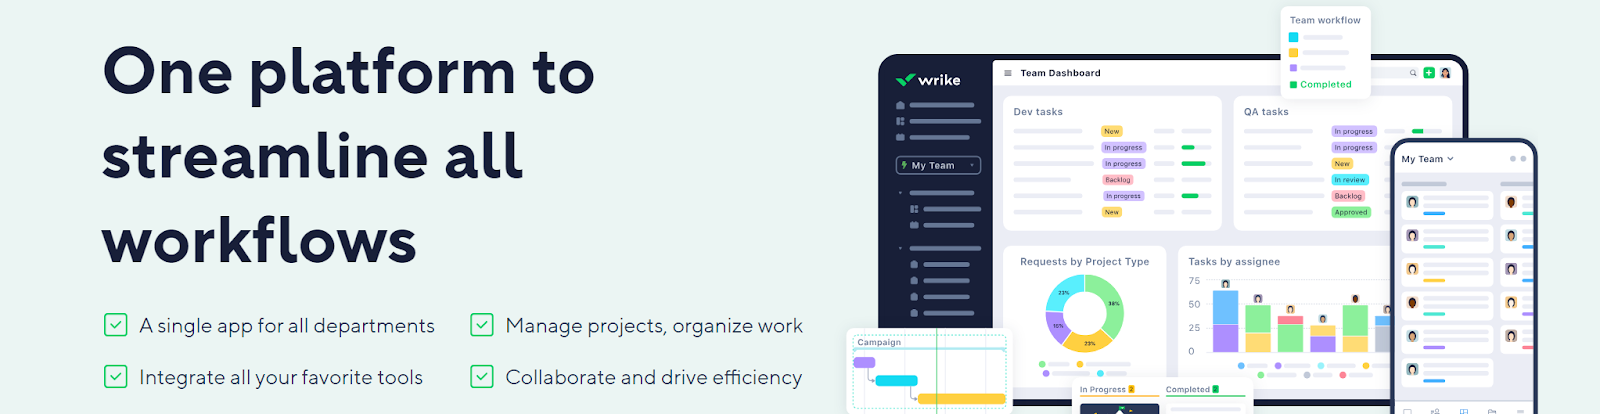 Image showing Wrike as one of the best agile workflow tools